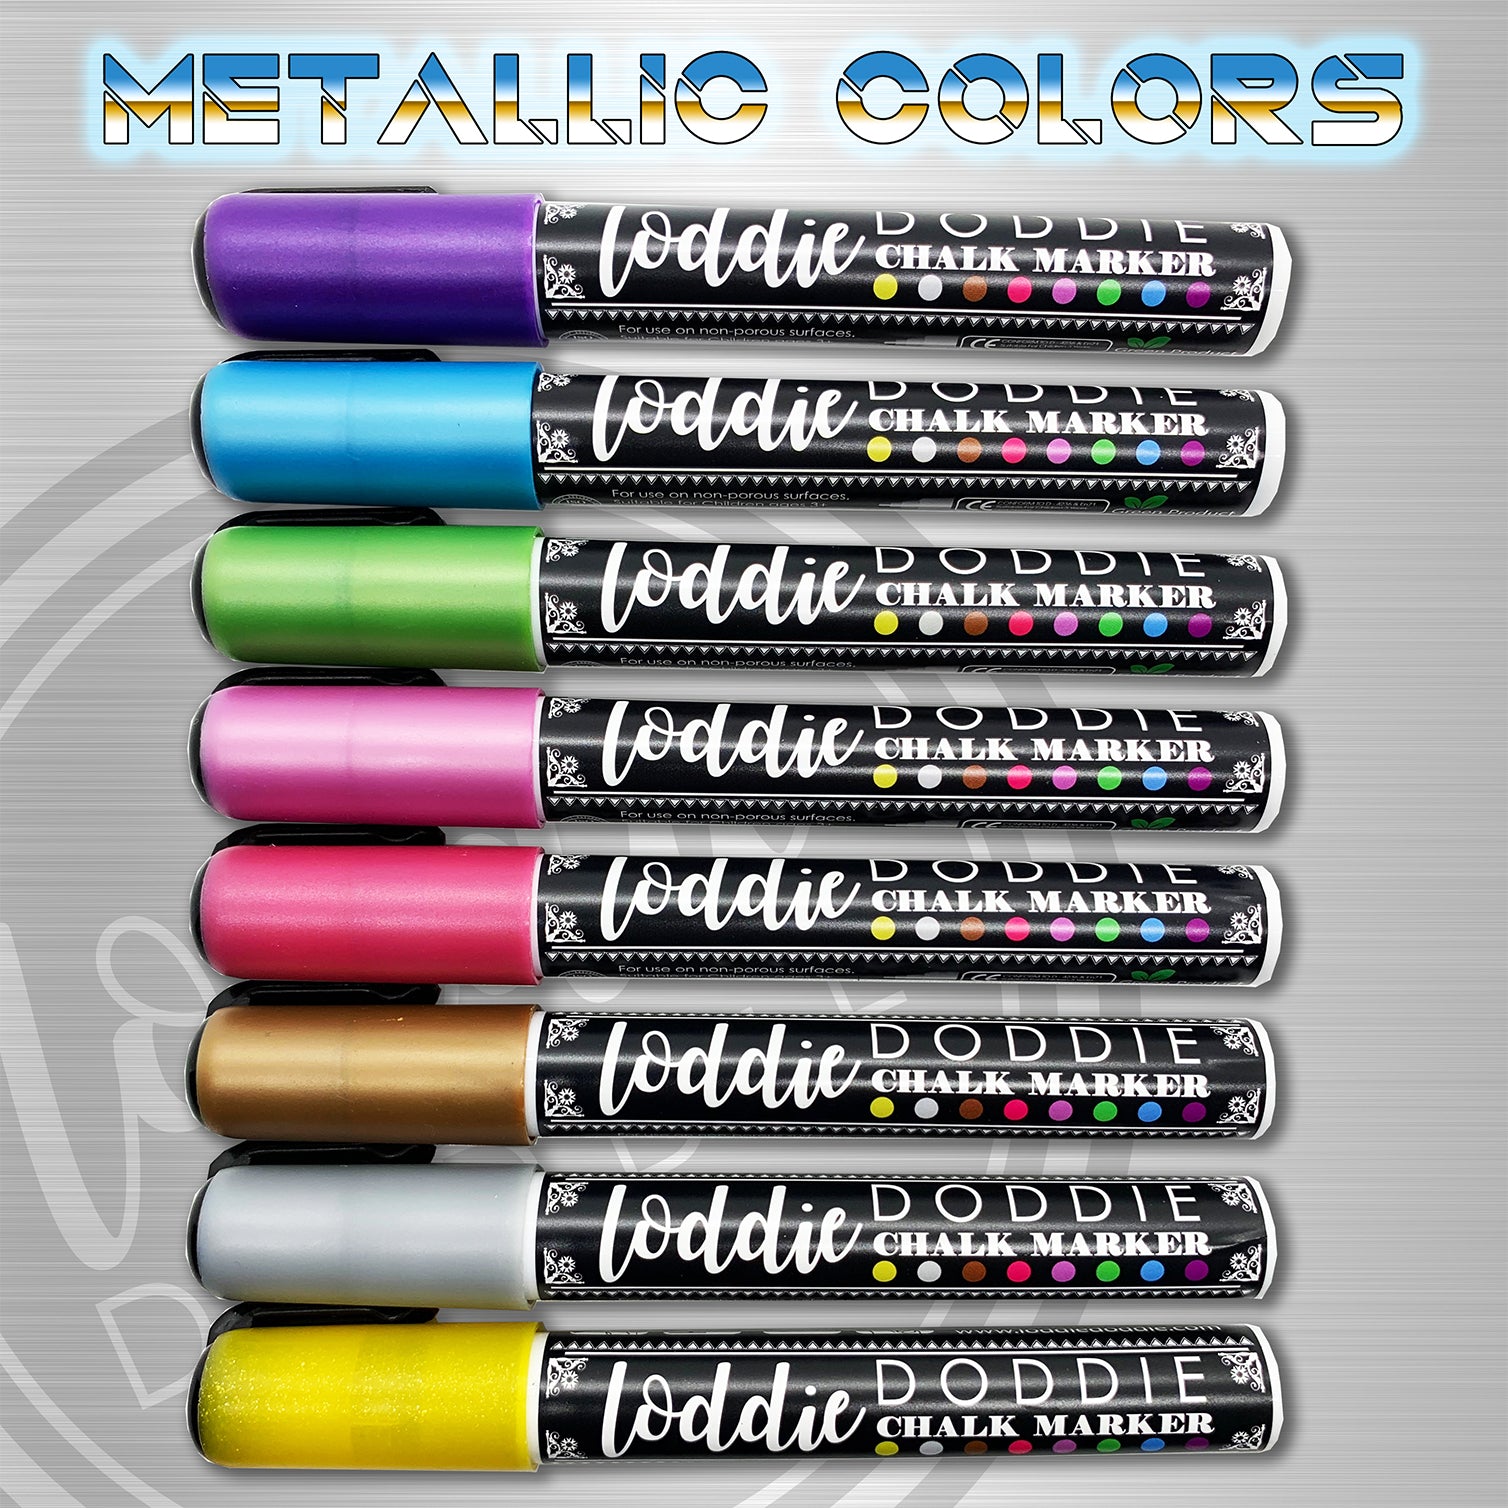 Fun fact! Loddie Doddie chalk markers work great on any glass surface such  as a mirror! They wipe away with just a damp cloth! So, now you can  easily